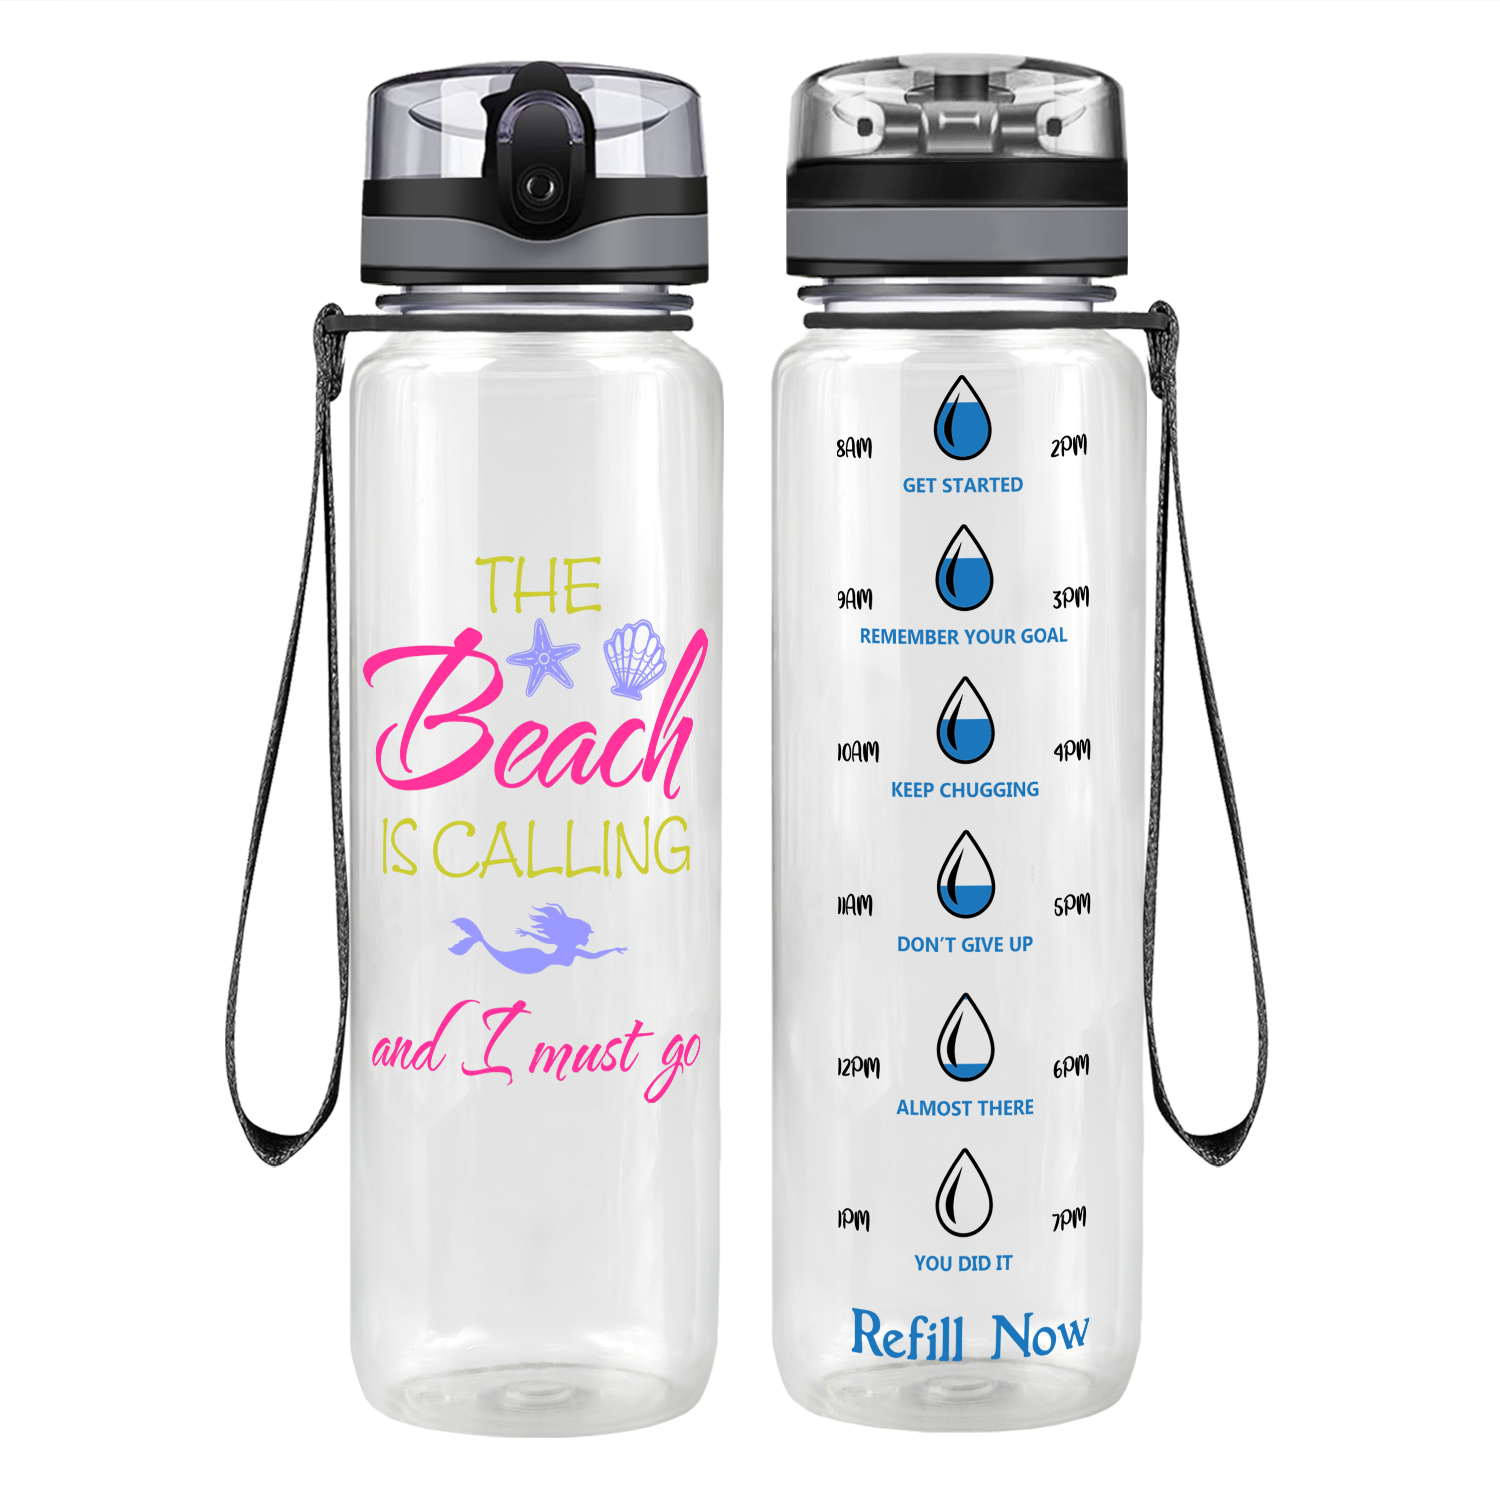 The Beach is Calling on 32 oz Motivational Tracking Water Bottle